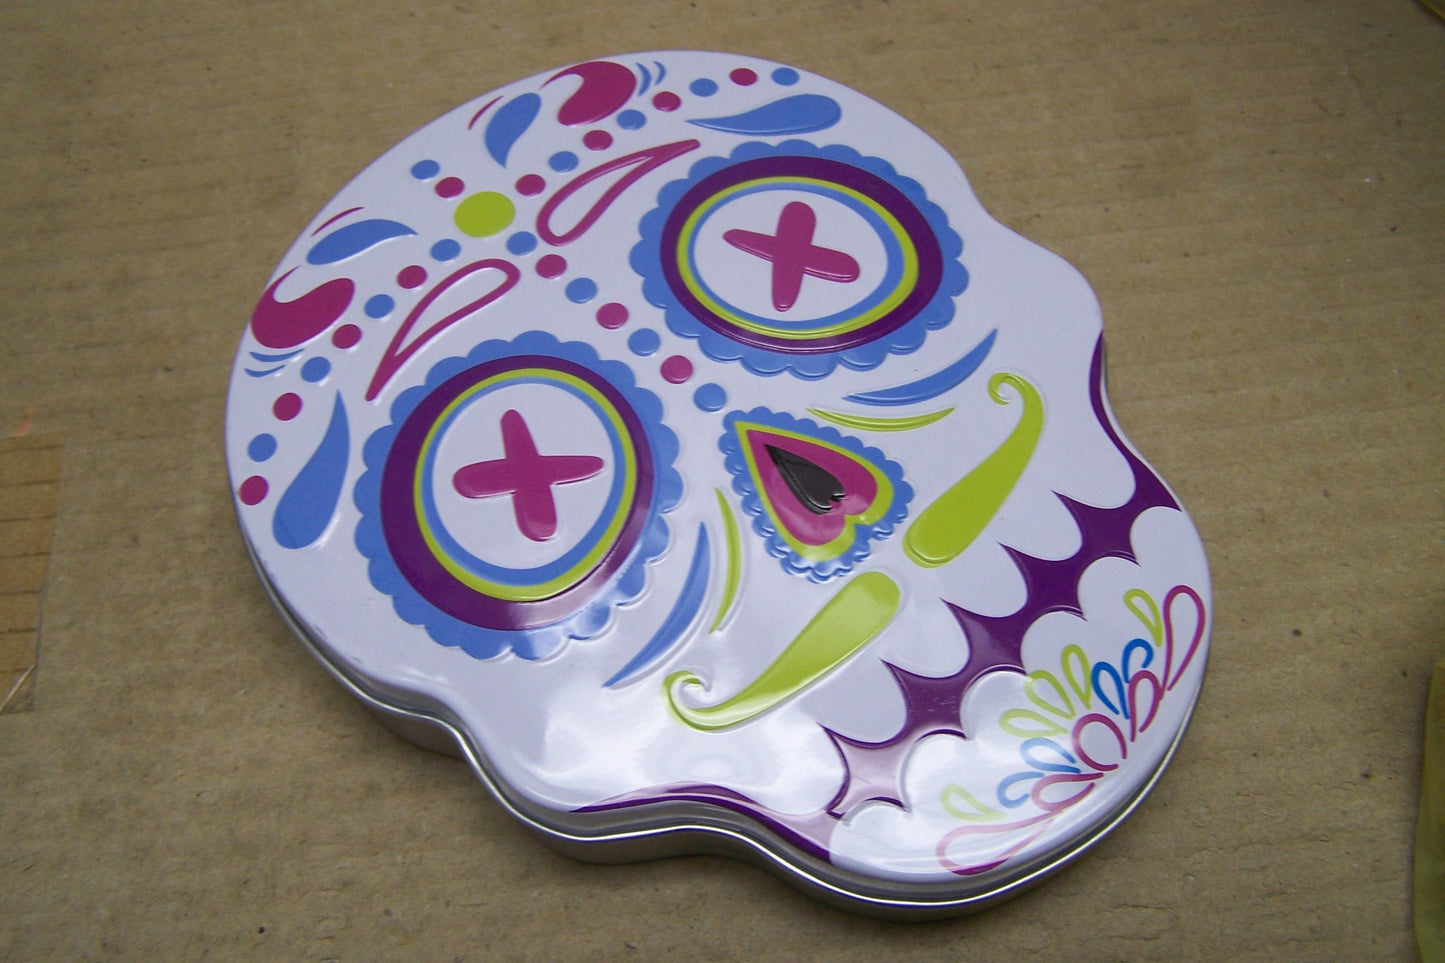 Wholesale Lot of 10 Day of the Dead Sugar Skull Metal Candy Tin, White - Dia de los Muertos